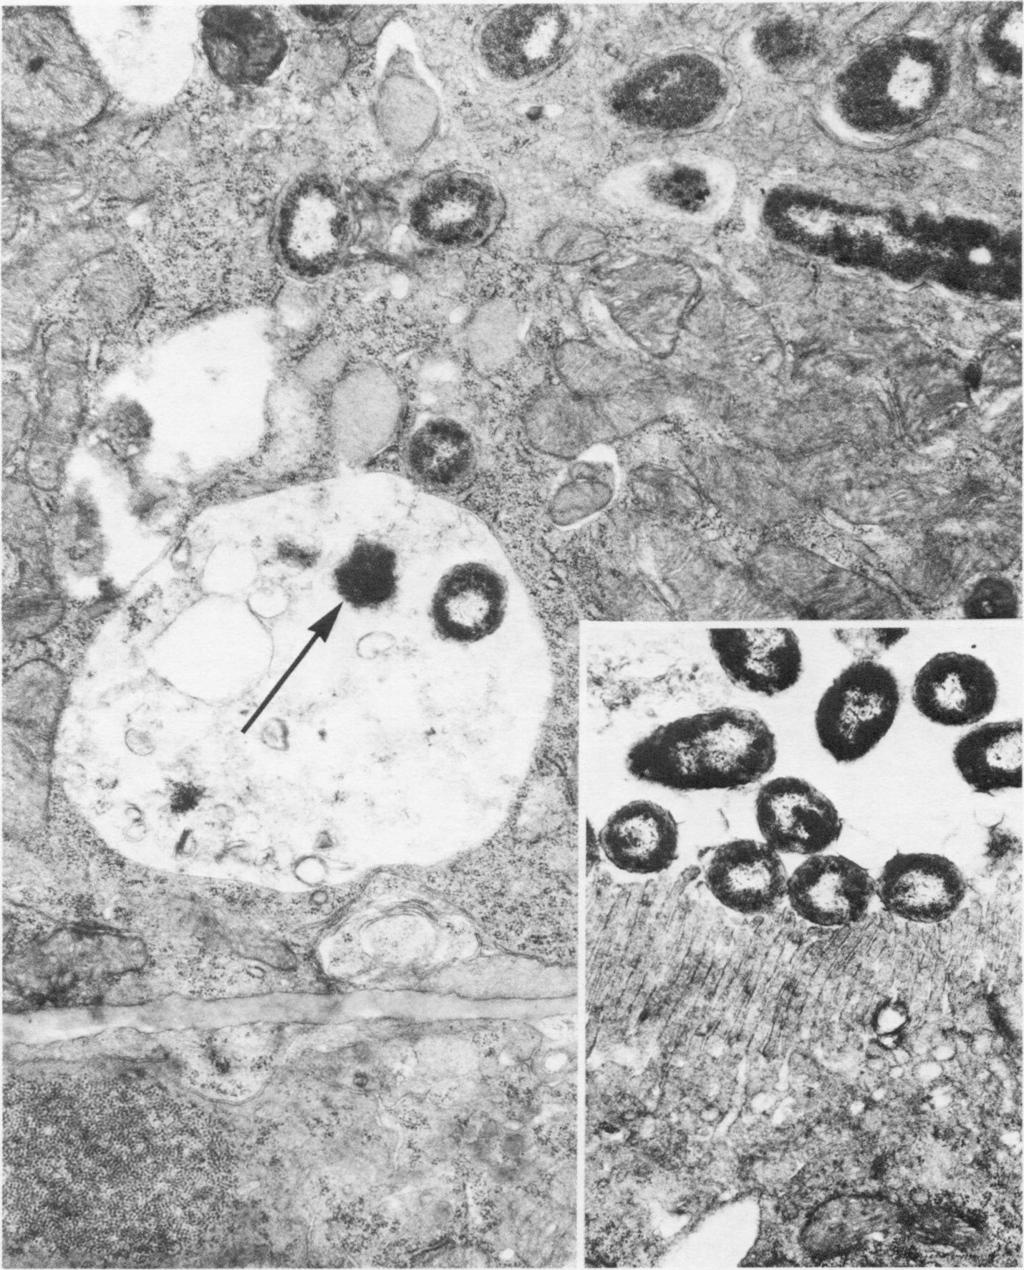 PYELONEPHRITIS, COBRA VENOM FACTOR 271 FIG. 4. A proximal convoluted tubular epithelium of a CVF-treated rat killed on day 2. Several bacterial bodies are seen in the cytoplasm.